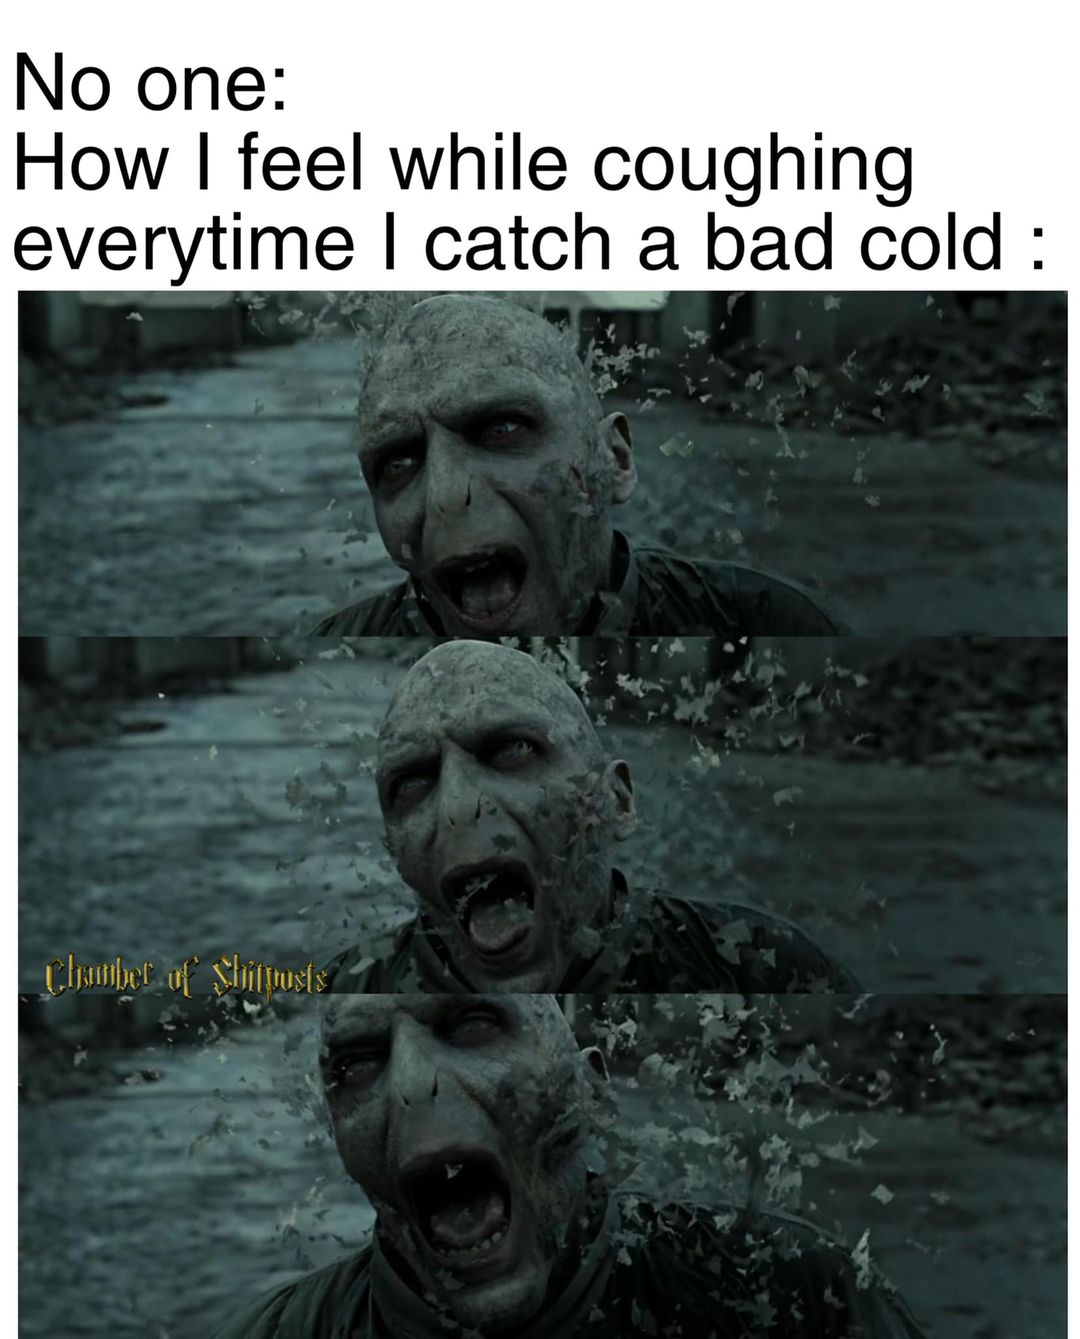 Harry Potter memes - water - No one How I feel while coughing everytime I catch a bad cold Chamber of Shitposts